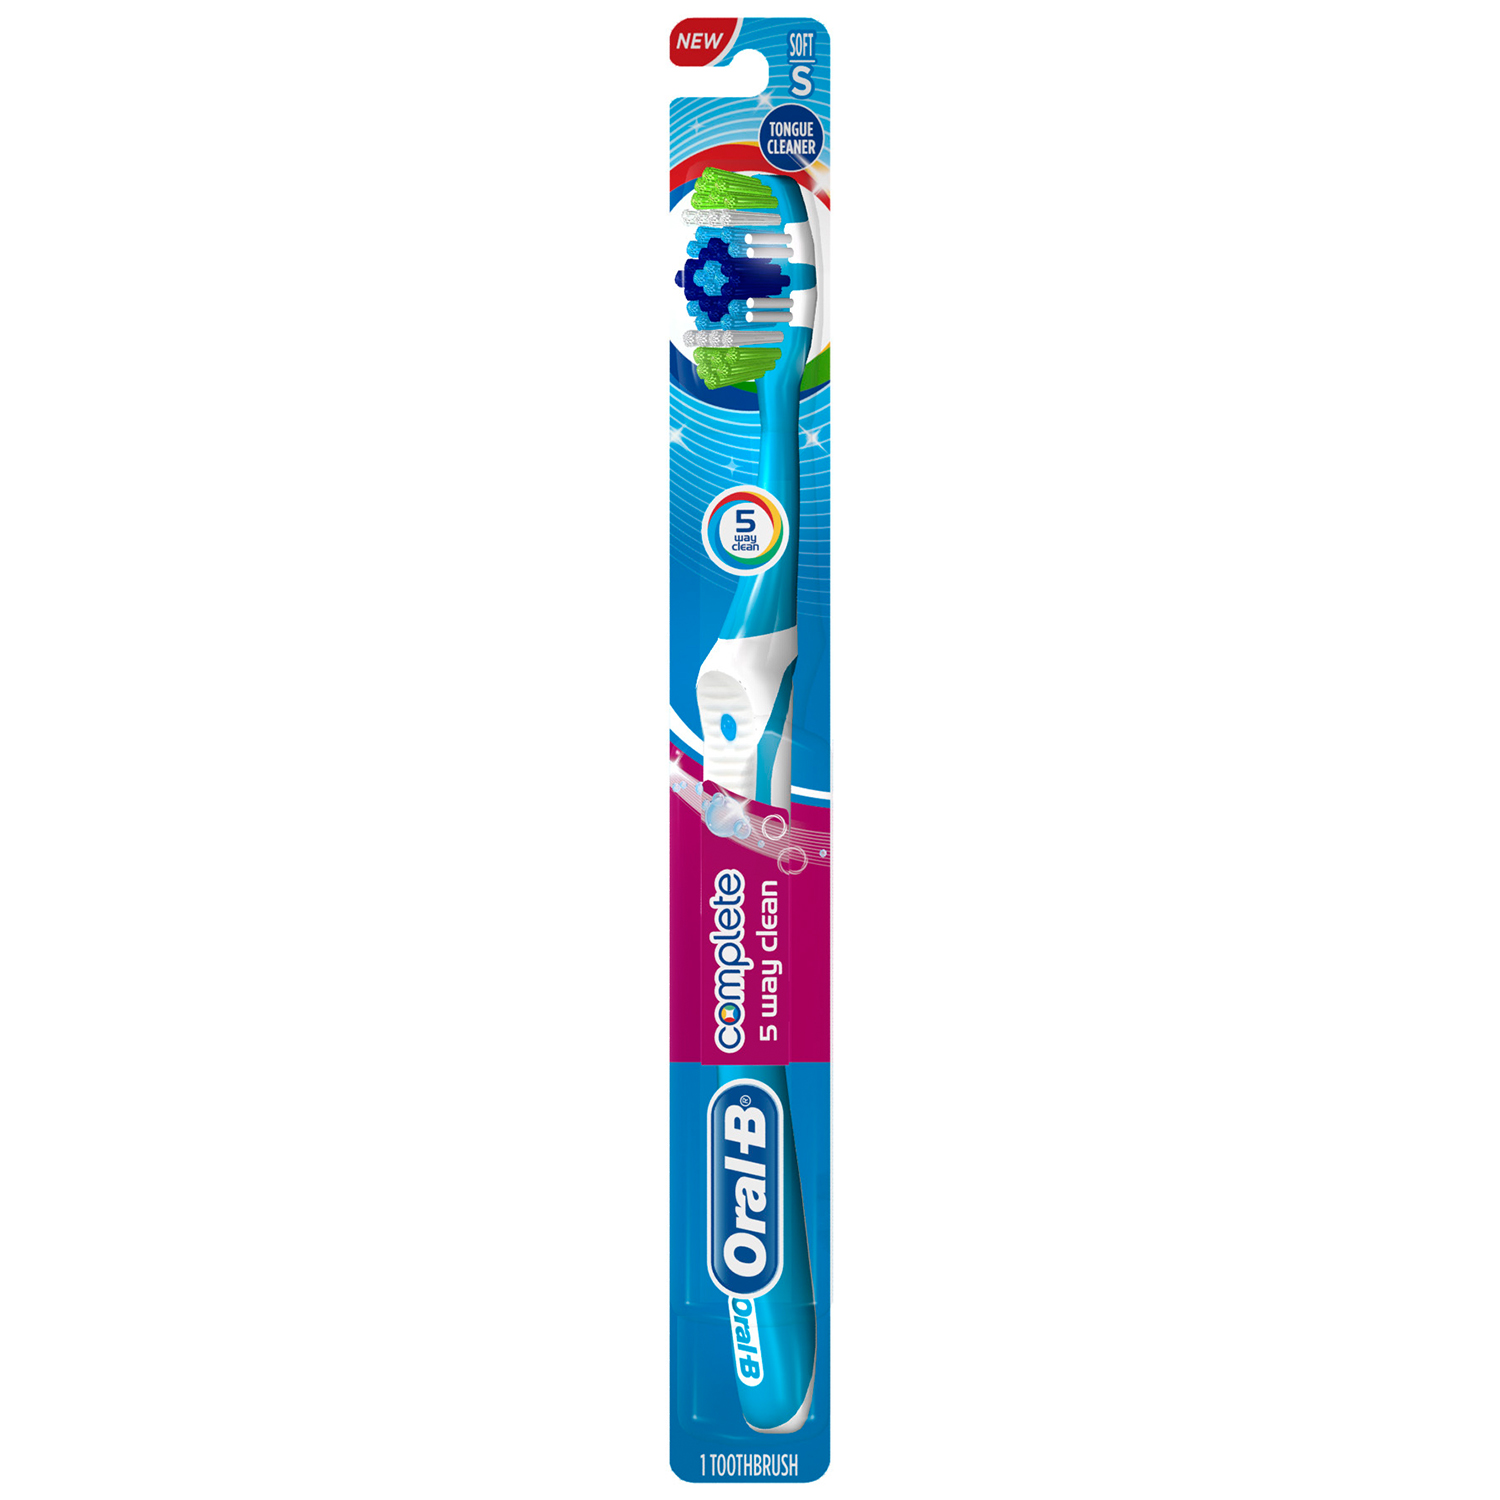 Oral-B Complete 5-Way Clean Soft Toothbrush